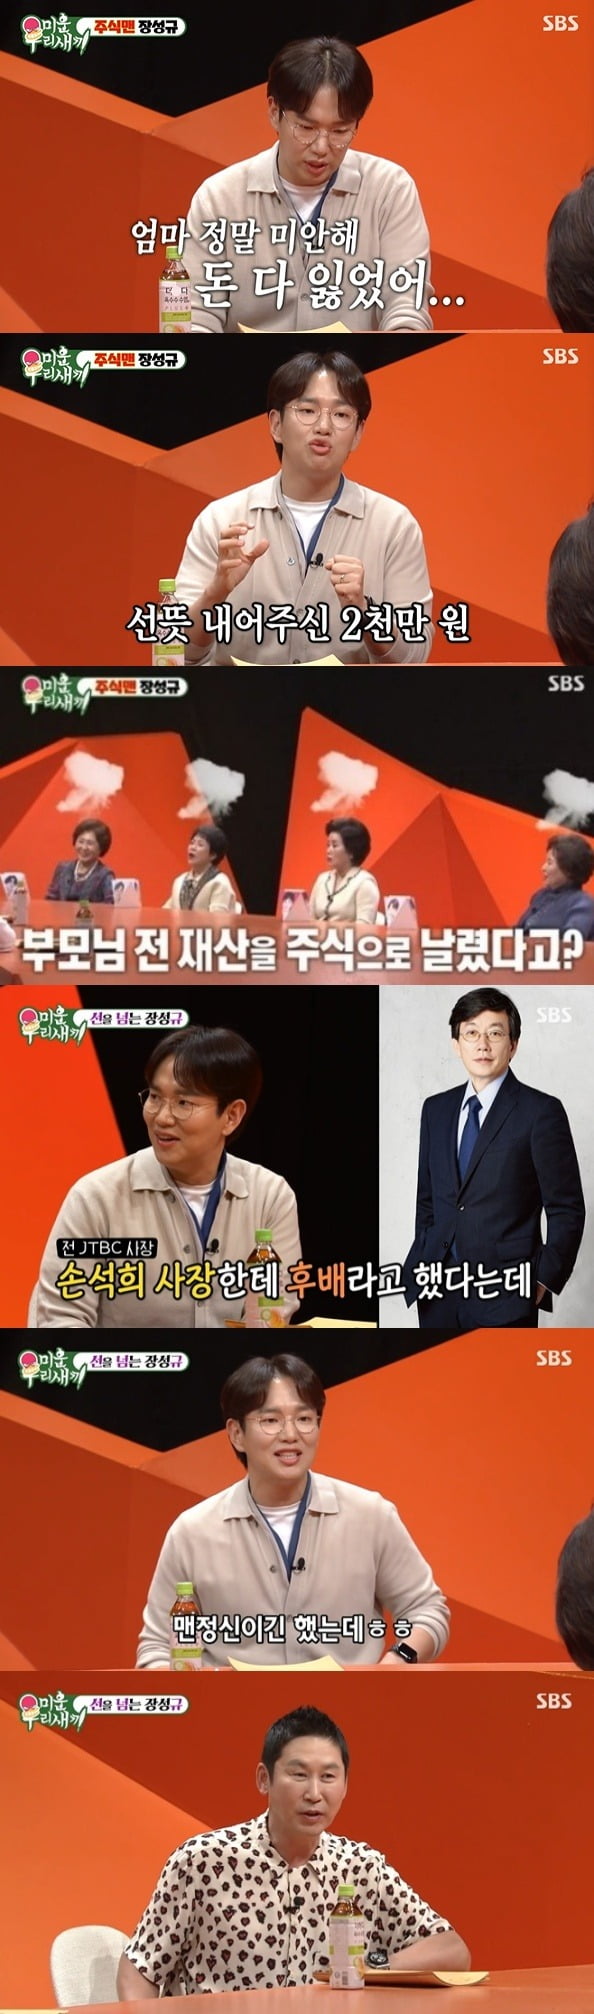 My Little Old Boy special MC Jang Sung-kyu has made a contribution to his parents property with Share.On SBS My Little Old Boy broadcasted on the 9th, the broadcaster Jang Sung-kyu was a special MC.On this day, Jang Sung-kyu talked about a shocking past: I started studying Share in the middle of college when I wanted to raise my house in a time when I was not enough.I asked my mother how much I would like to raise my house, he said.Jang Sung-kyu said, It was the first time I talked like this, and I was confident that I received a loan of 10 million won for Hani, and gave me 20 million won. My sister added 5 million won and paid 25 million won.He said, After a month, I eventually left about 1 million won and I lost all my money.I was worried about how to tell you this, even if I was watching the monitor in the morning, I decided to put a snack in it, and I decided to tell you now, and I started to cry, and if I did not cry, I would be more angry.Jang Sung-kyu said, I was really sorry for my mother and I lost all my money.Son was sick of heart and gave comfort to be nothing.On Mothers comfort, Jang Sung-kyu said he cried more, and he also showed great sincerity, saying, We should do better to Mother.Jang Sung-kyu also explained his beyond line character.When asked by MCs, I told Sohn Suk-hee that he was my junior, he was confused, Jang Sung-kyu said, It was man-in-the-man.I was in the country since 2011 and President Sohn Suk-hee came in 2013 and said he was a junior, he said.Meanwhile, SBS My Little Old Boy is a program in which the mother becomes a speaker, observes the daily life of the son, and records the moment through a device called a child care diary. It is broadcast every Sunday night at 9:05 pm.